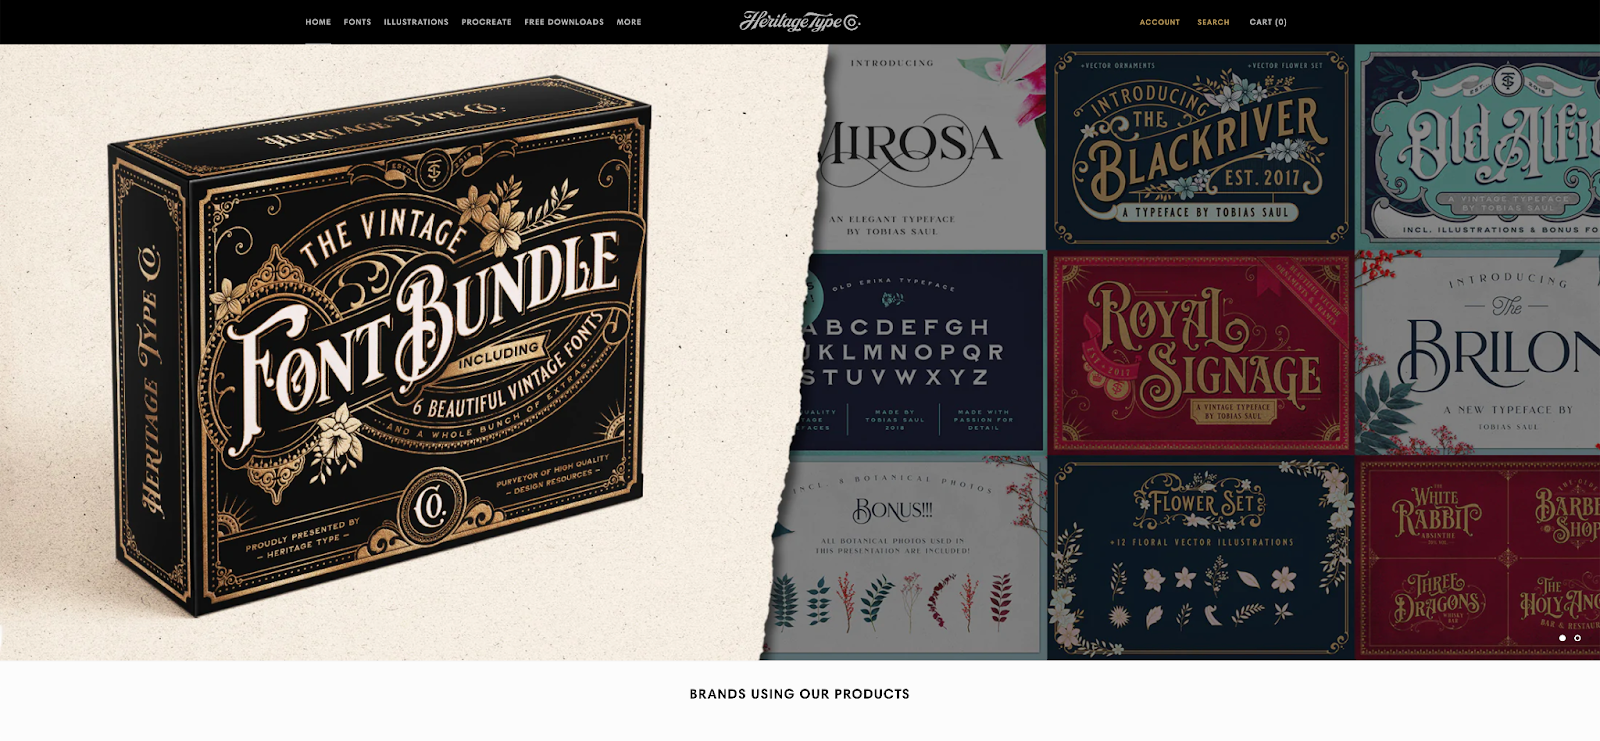 Get inspired by the Heritage Type website’s use of retro logos and fonts